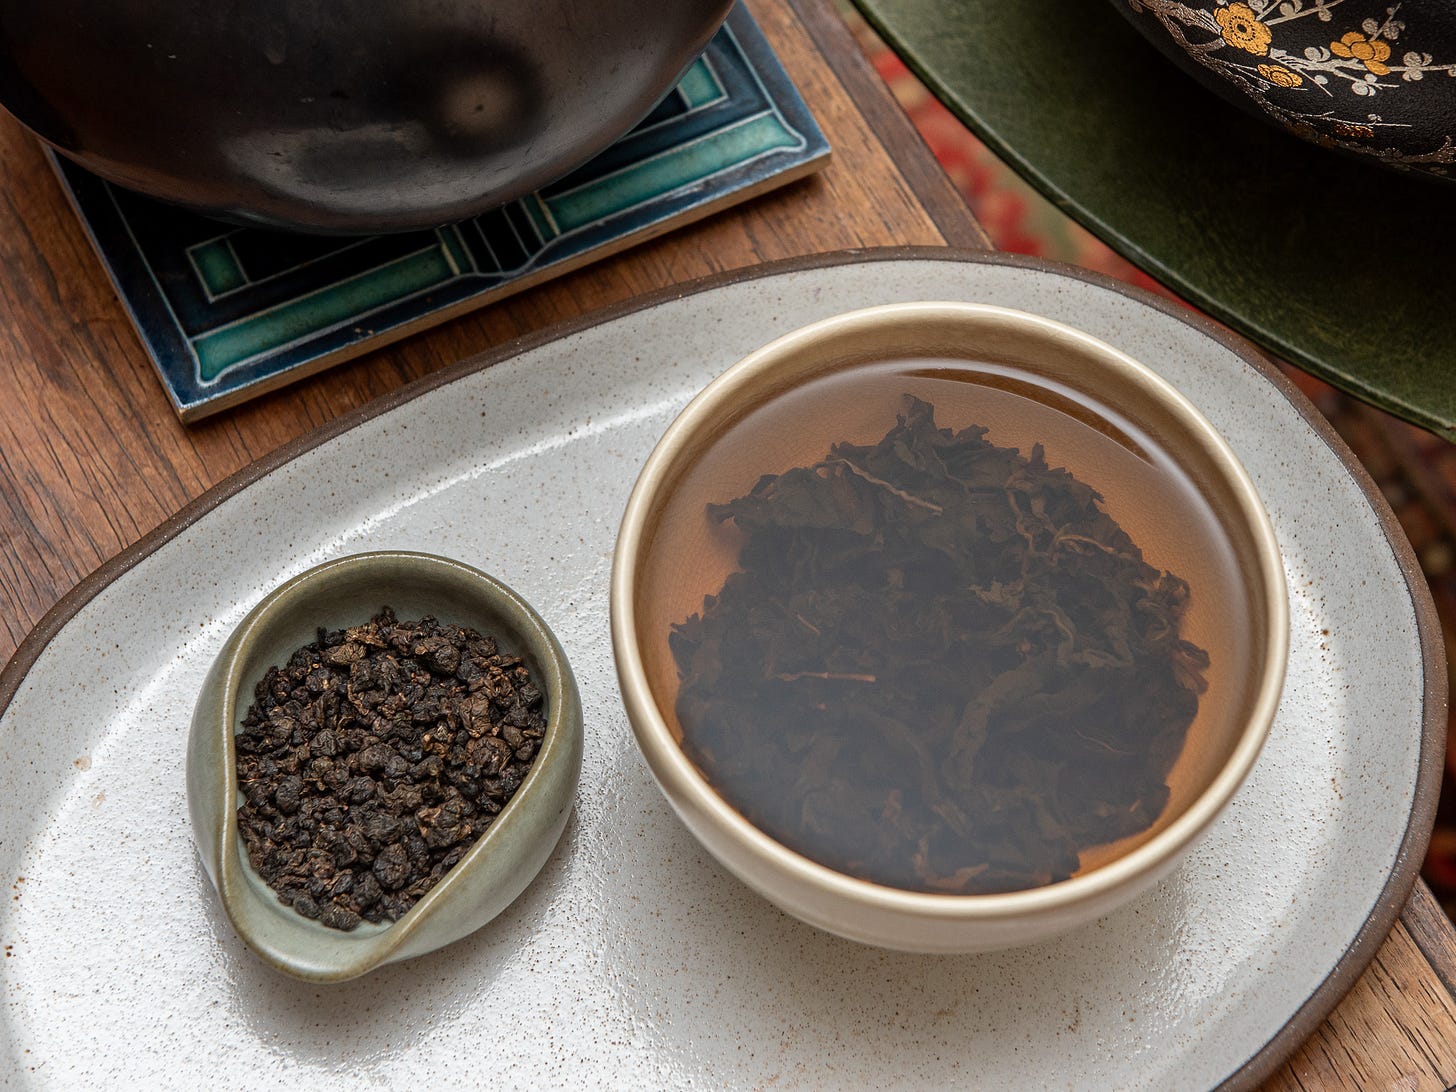 ID: Charcoal roasted high mountain oolong tea, dry and brewed